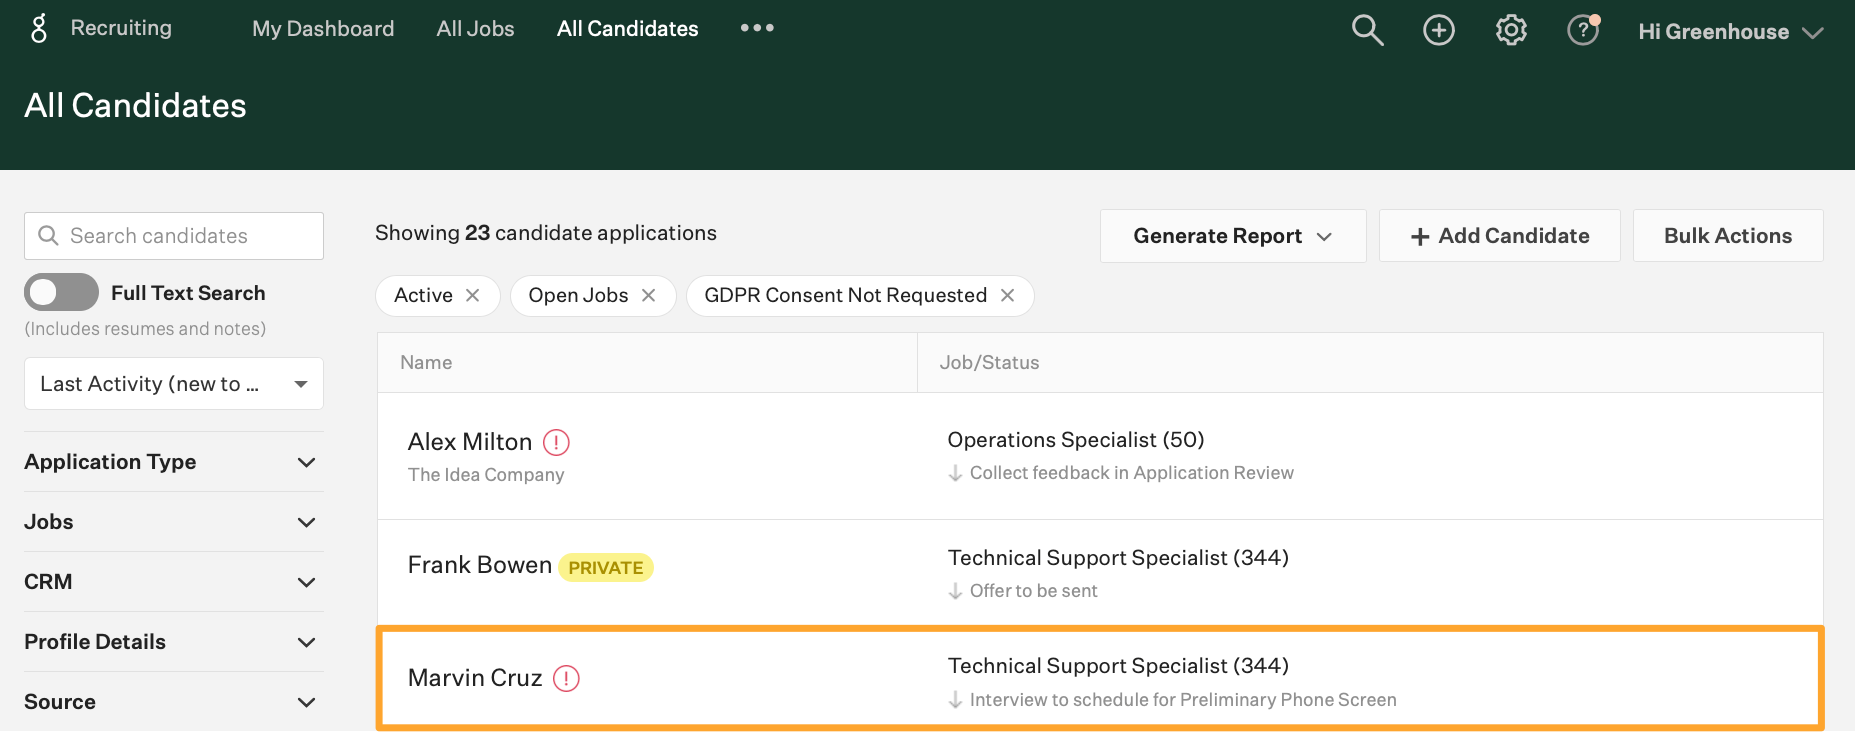 All Candidates: Select candidate requiring interview scheduling